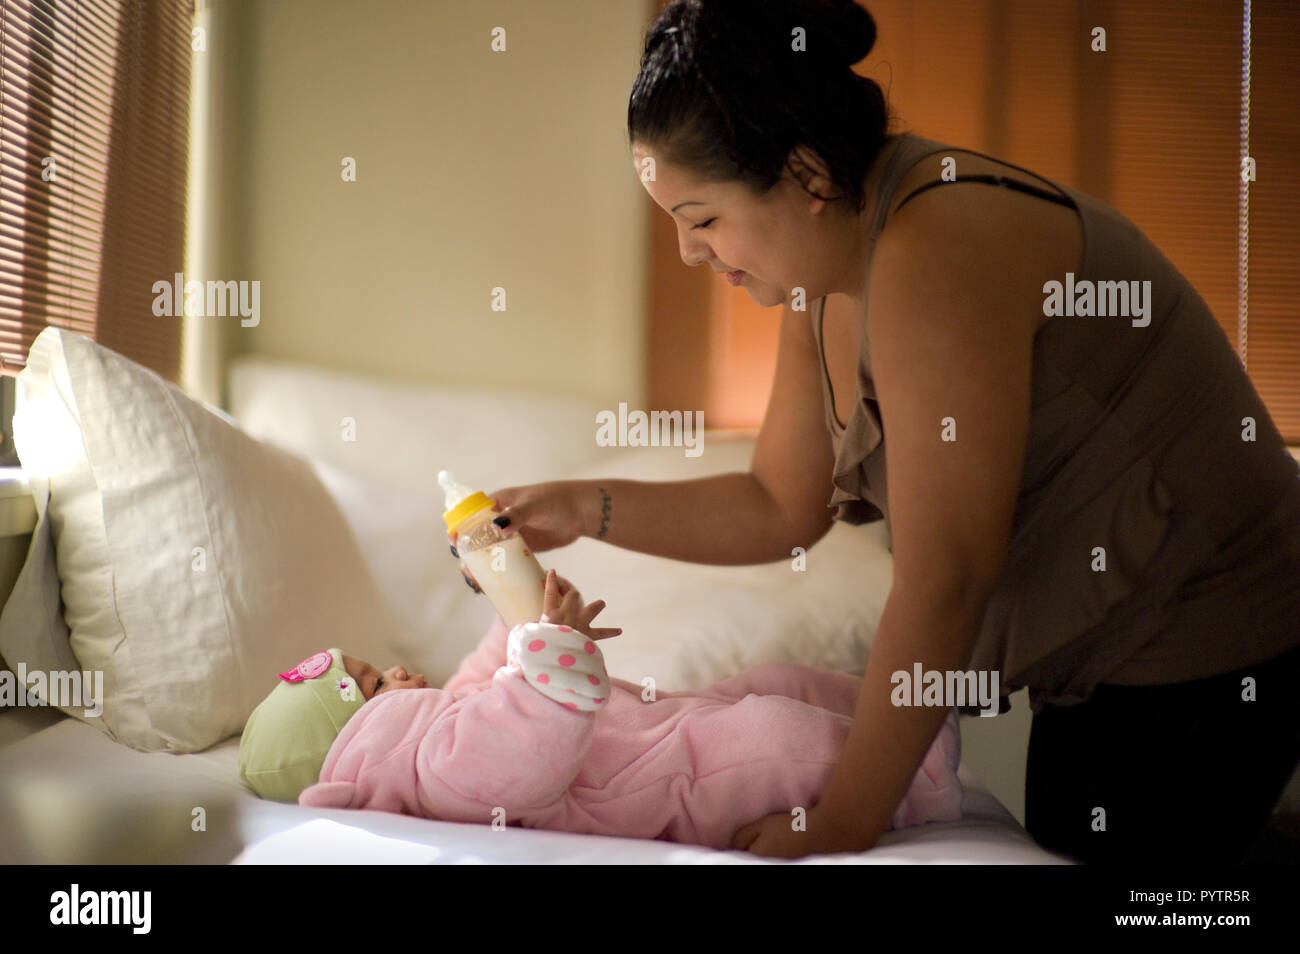 Young mother handing a bottle of milk to her baby daughter who is lying down on the bed. Stock Photo